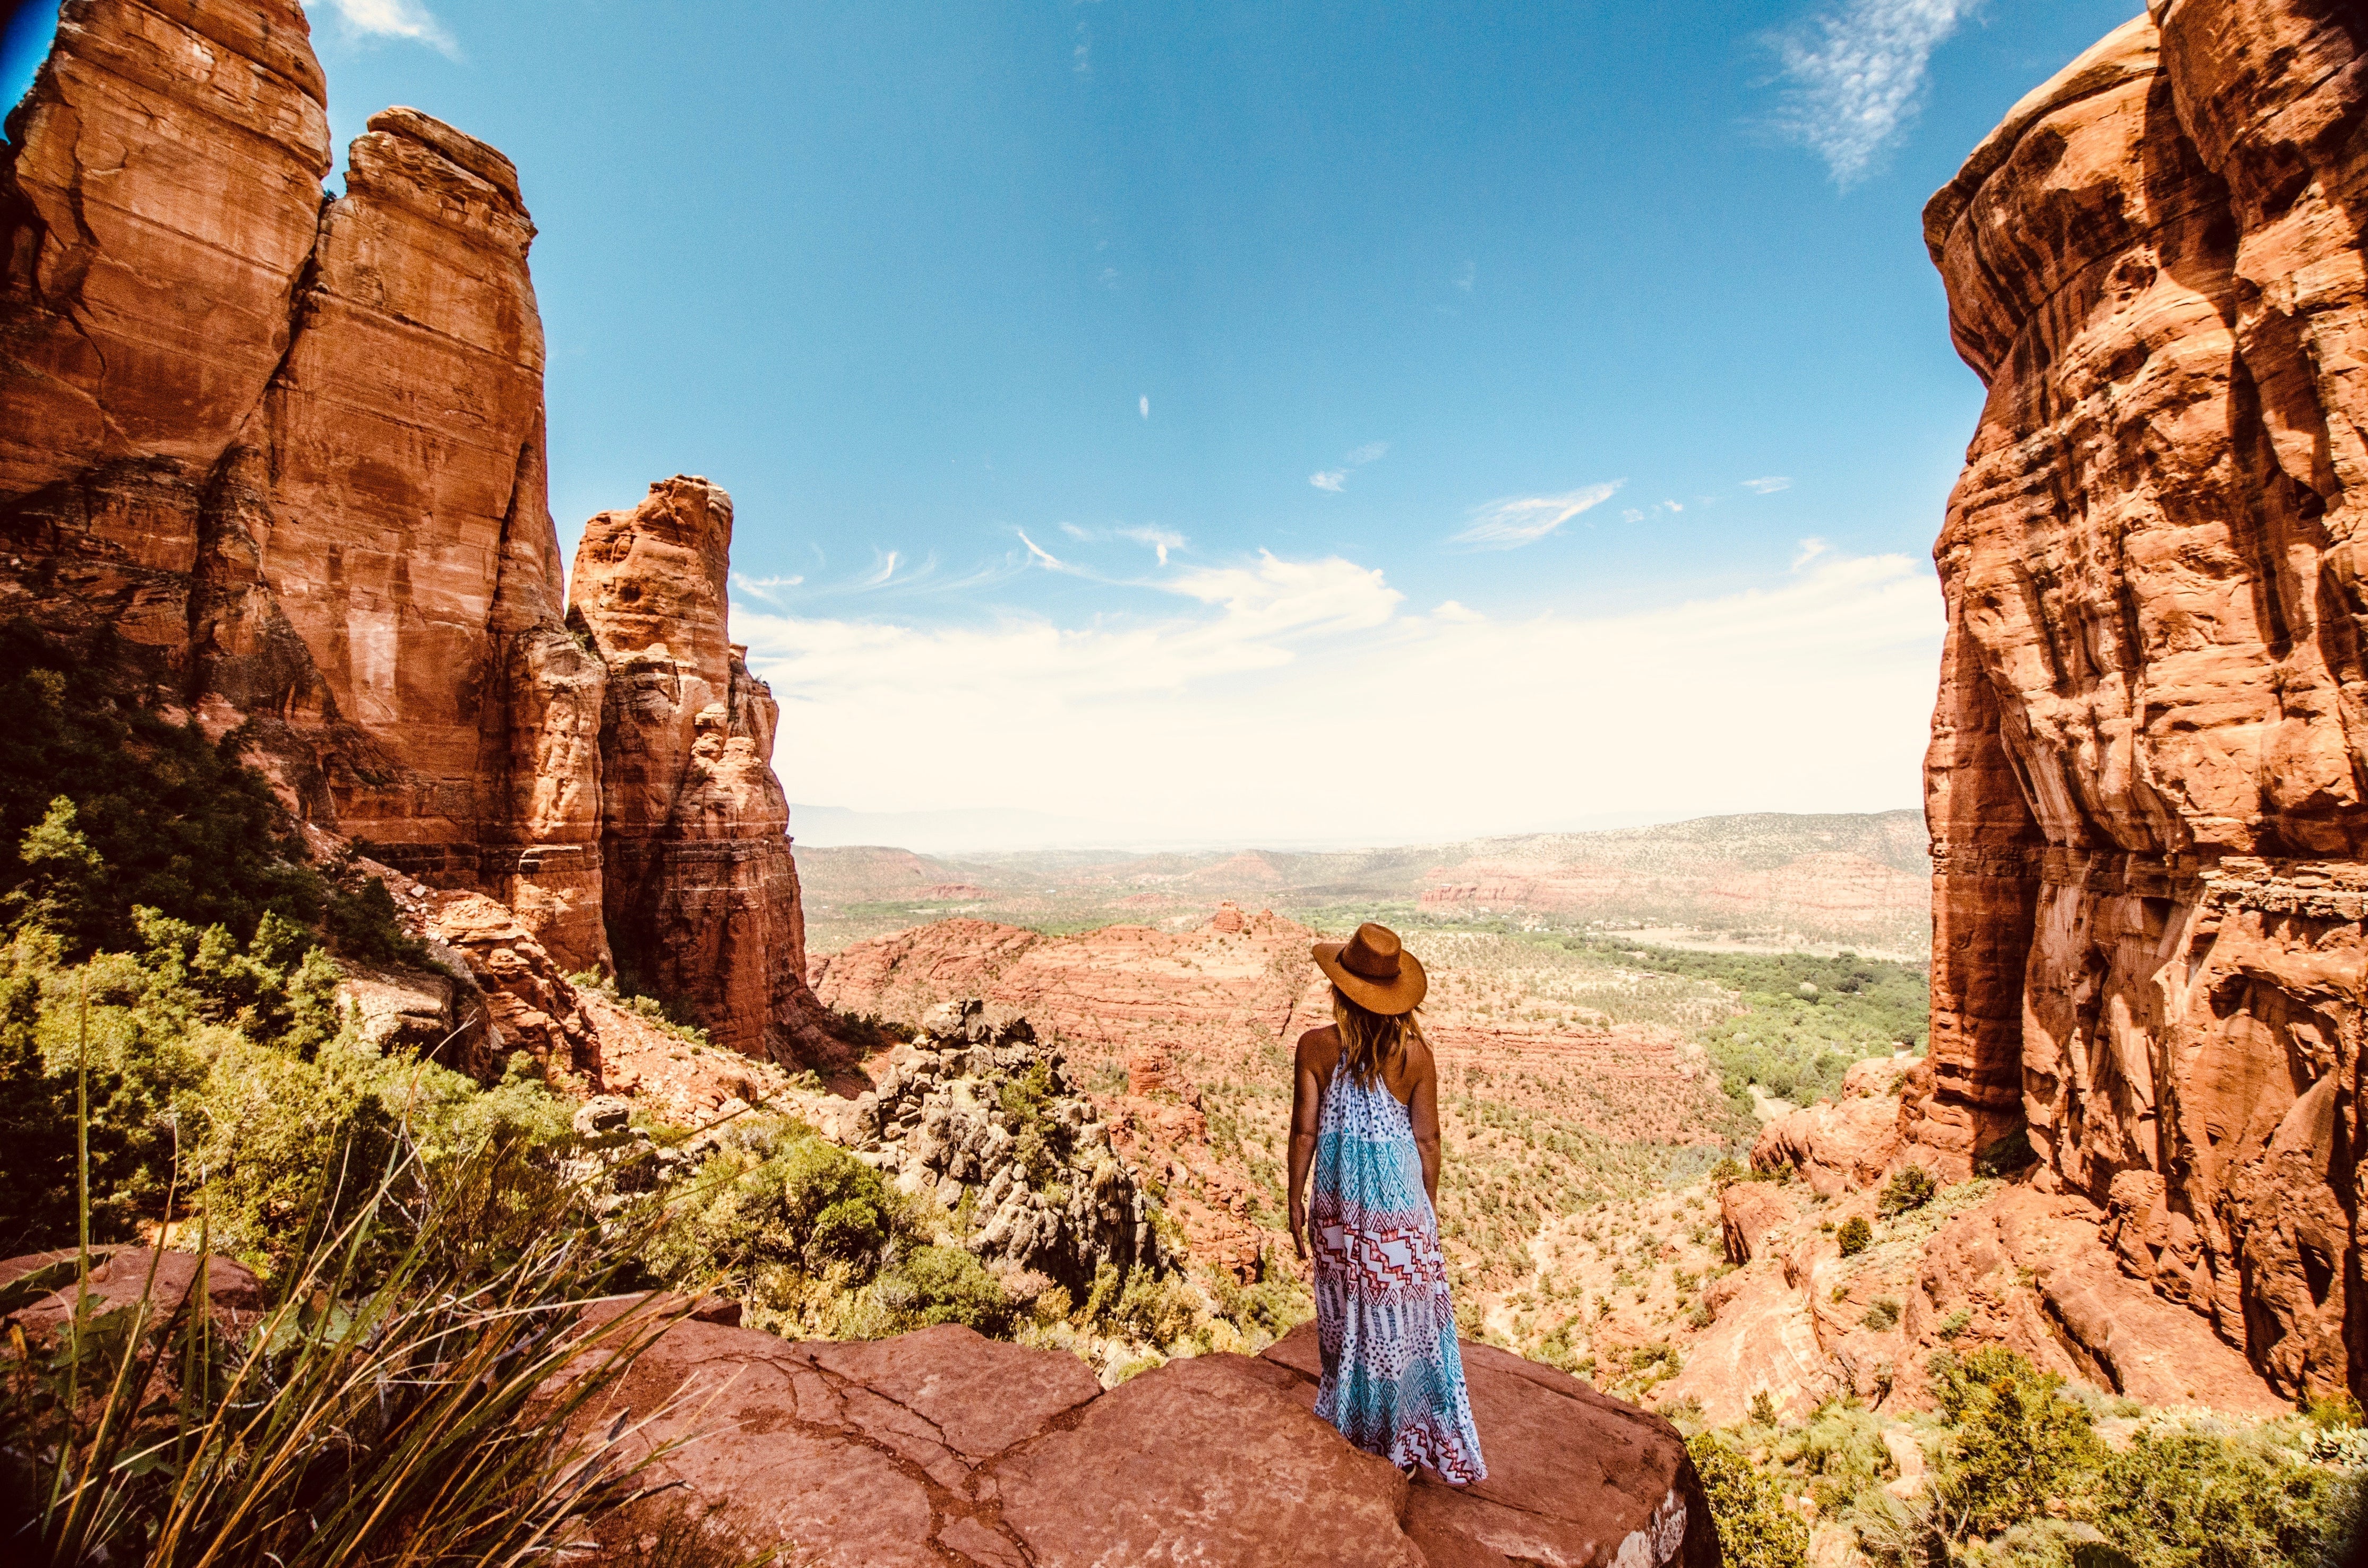 Woman in boho dress looks out over Grand Canyon, header image for webshop Mandala Stone